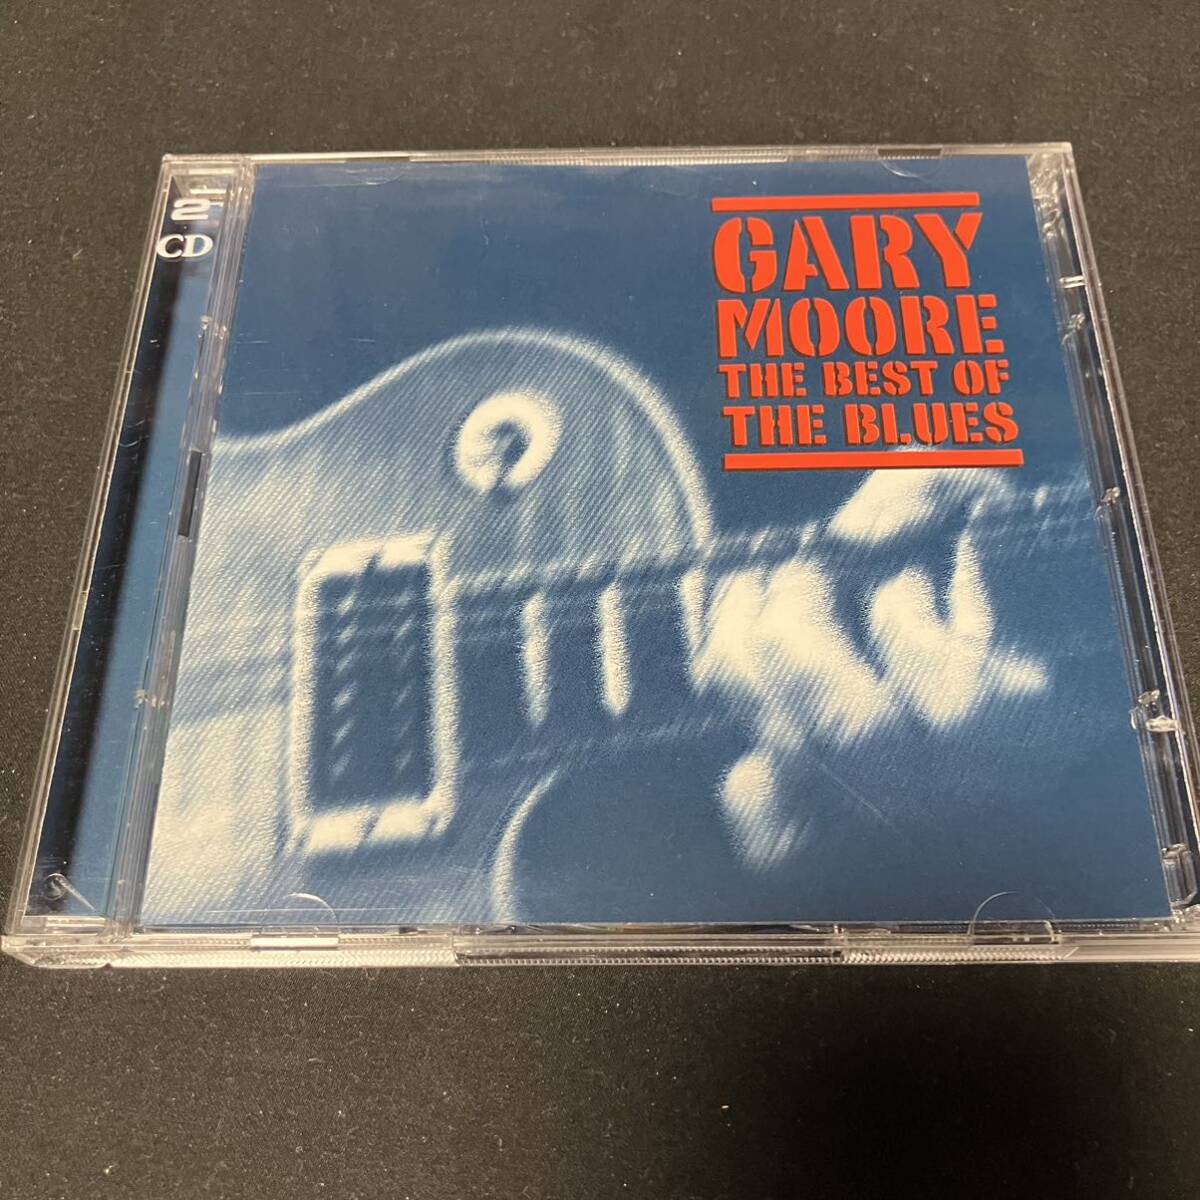 ZG1 CD ゲイリームーア GARY MOORE BEST OF THE BLUESの画像1